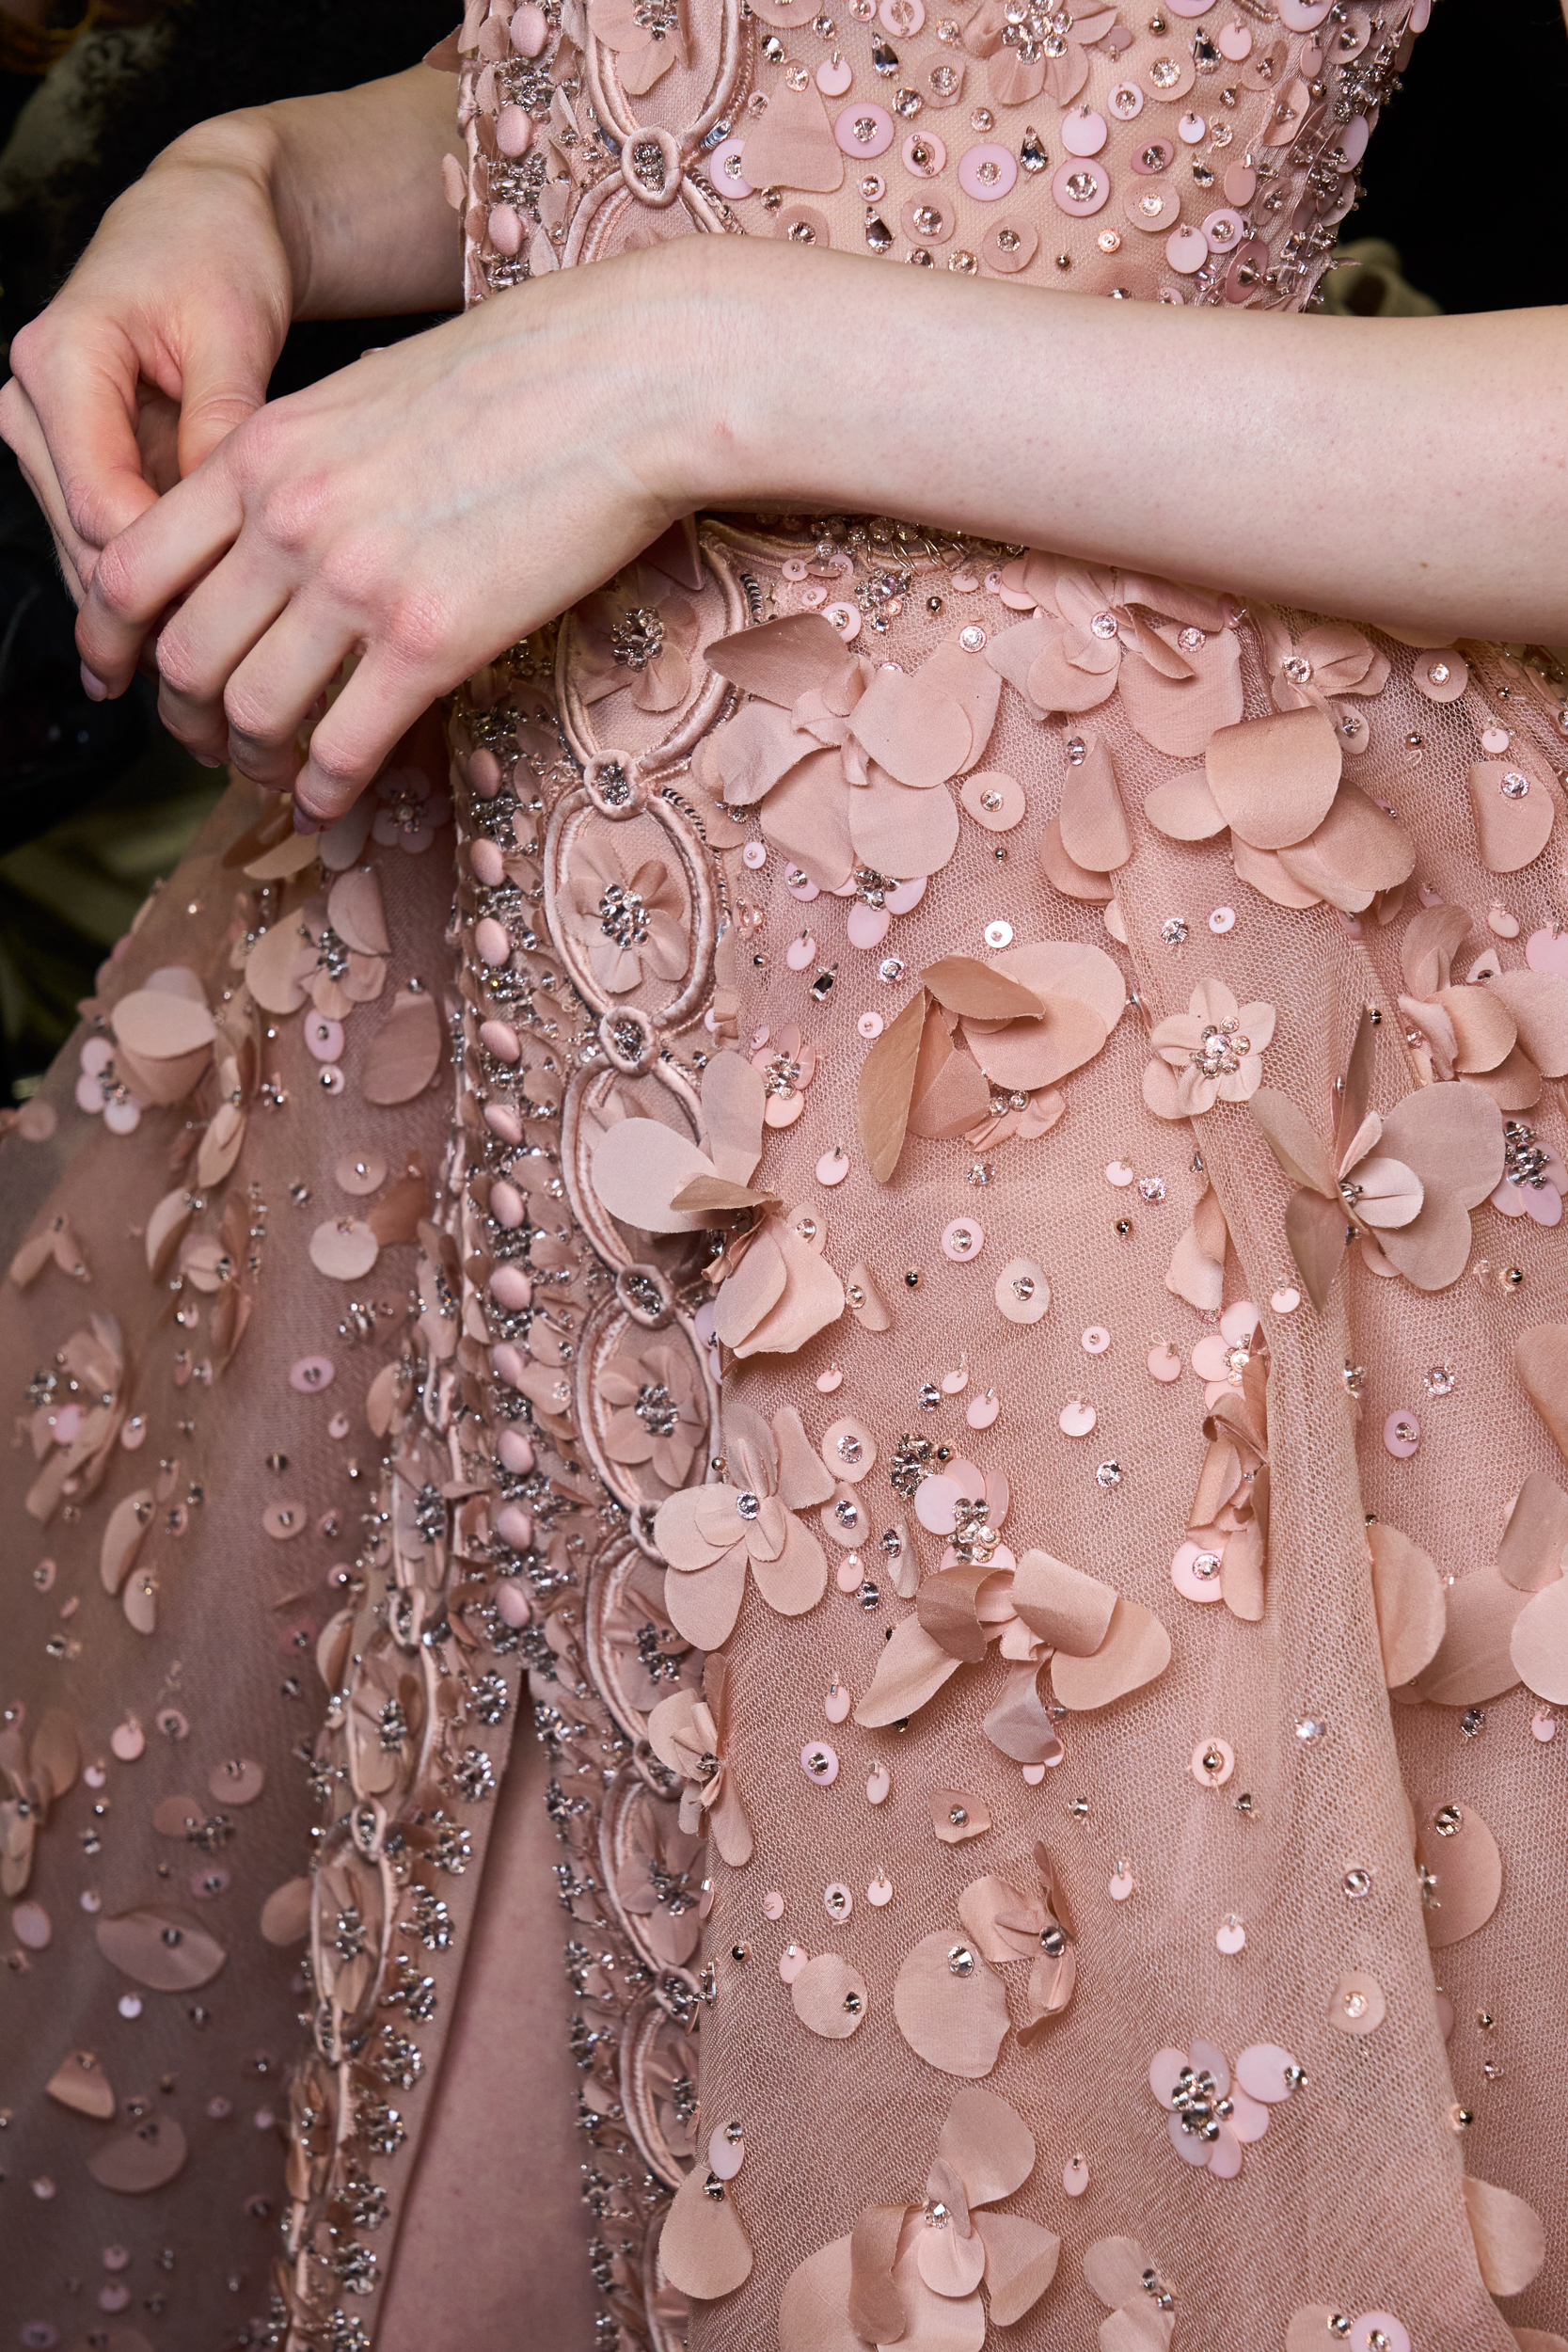 Elie Saab Spring 2024 Couture Fashion Show Backstage